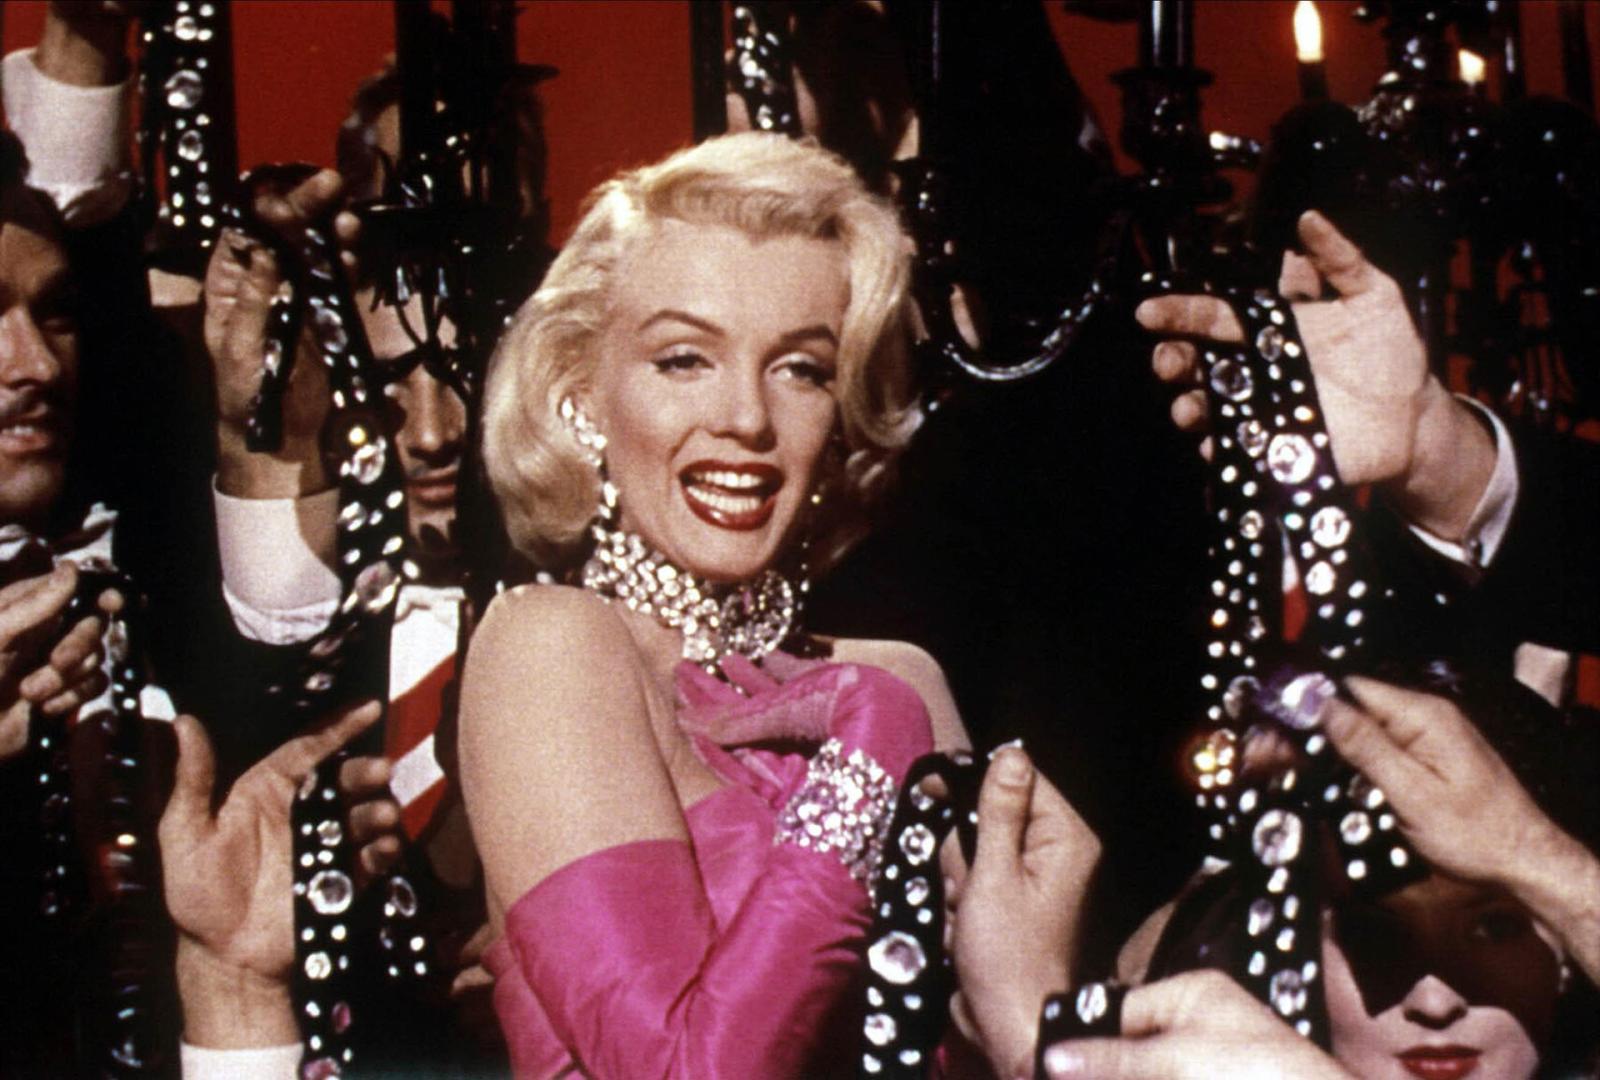 Costume Party: Ranking the 11 Most Memorable Movie Dresses of All Time - image 8